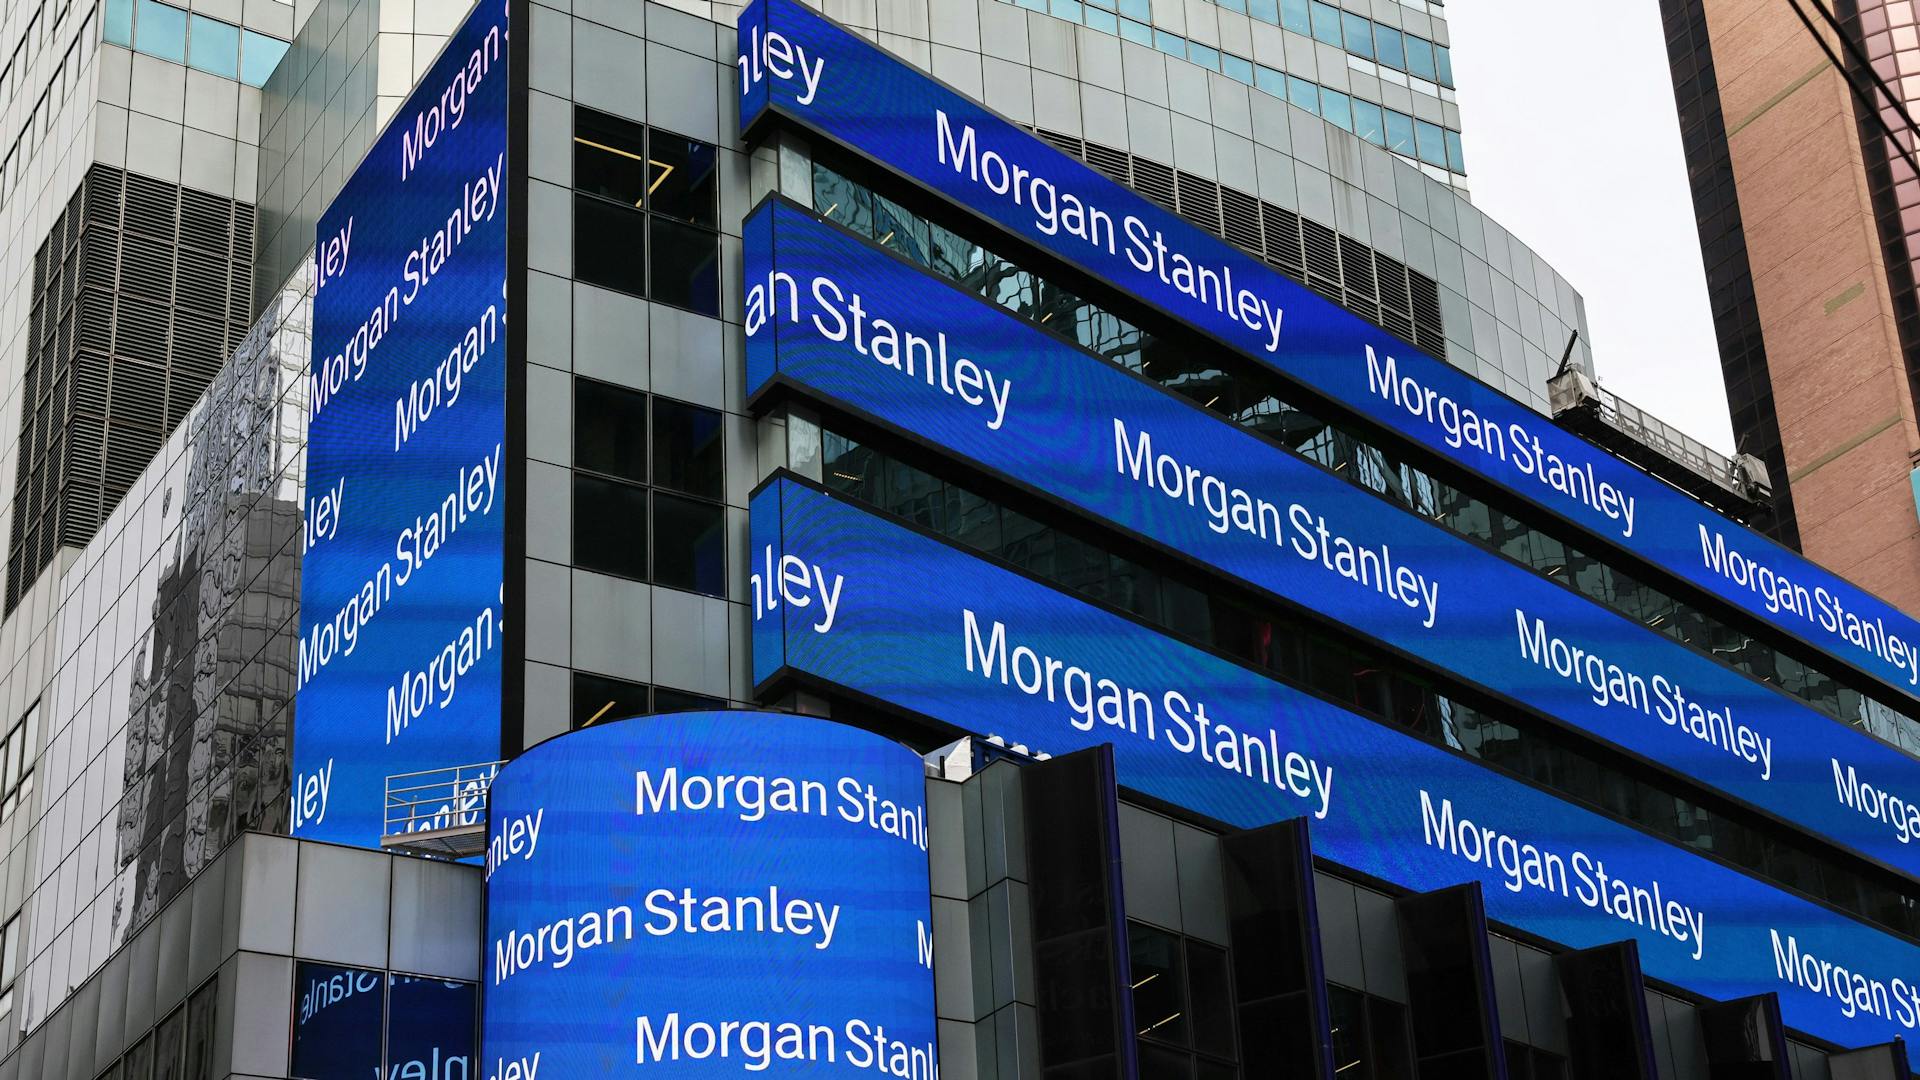 The Morgan Stanley headquarters building is seen on January 17, 2023 in New York City